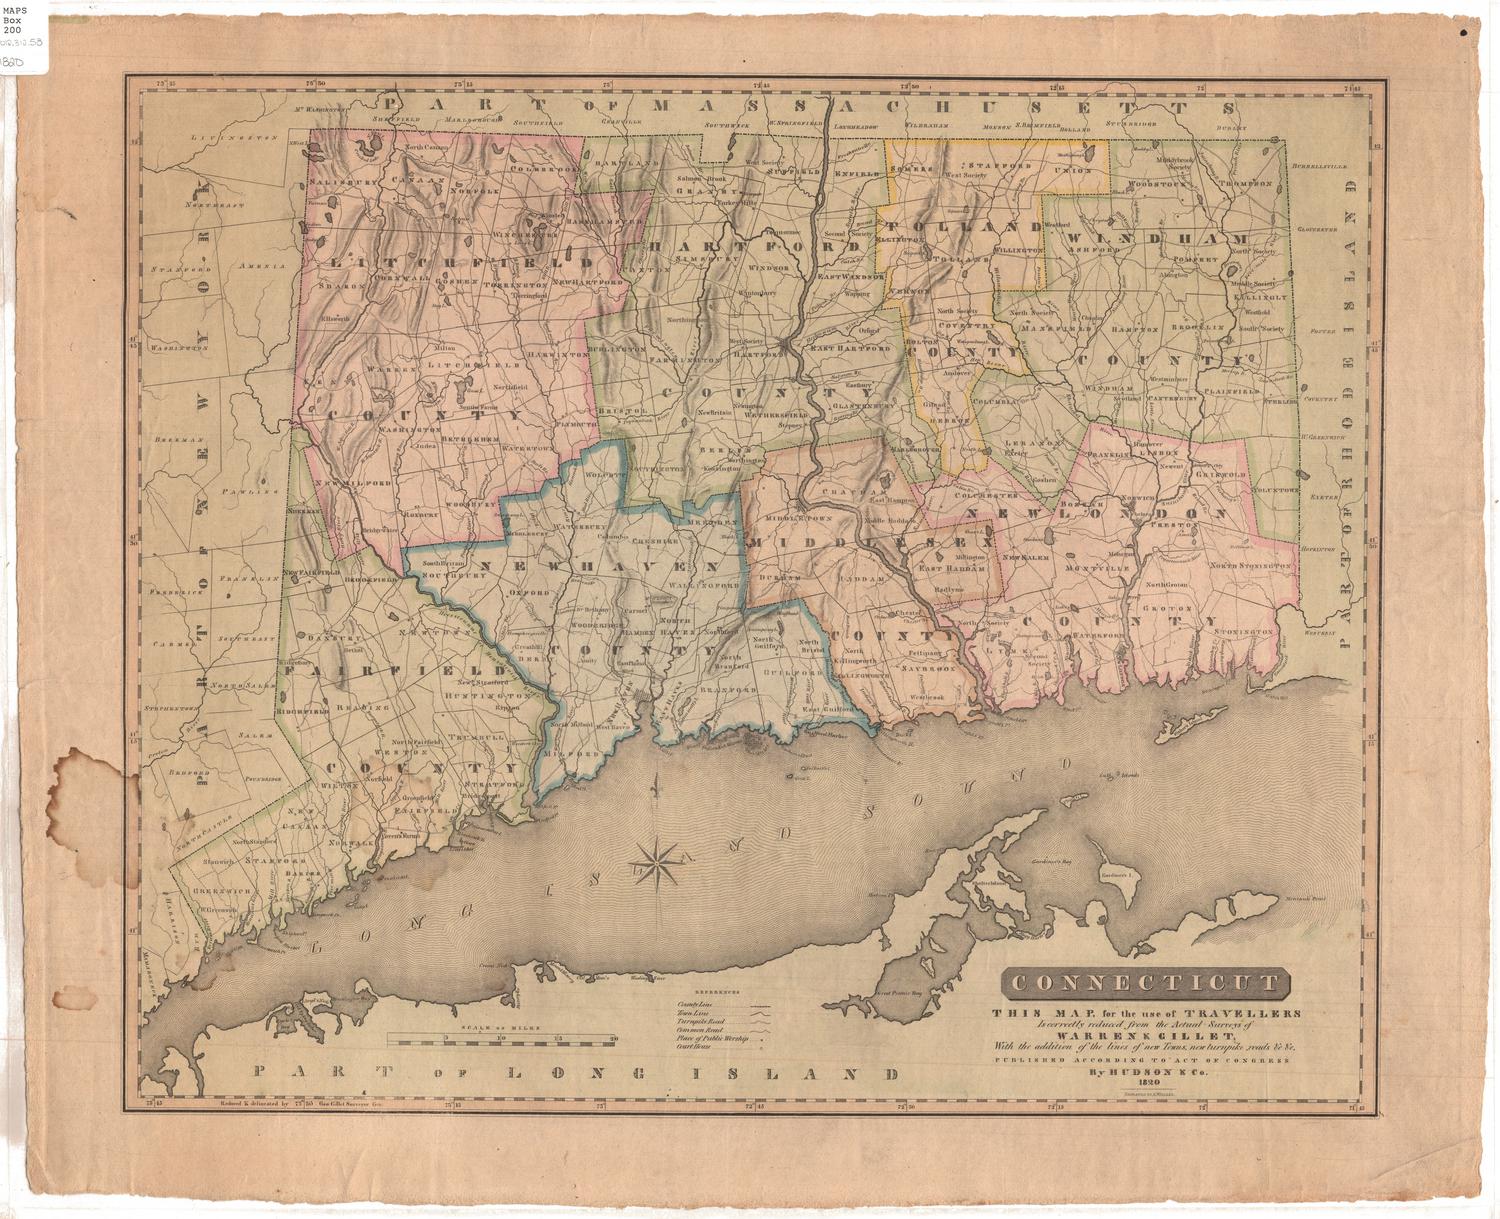 Connecticut Historical Society collection, 2012.312.58  © 2013 The Connecticut Historical Socie ...